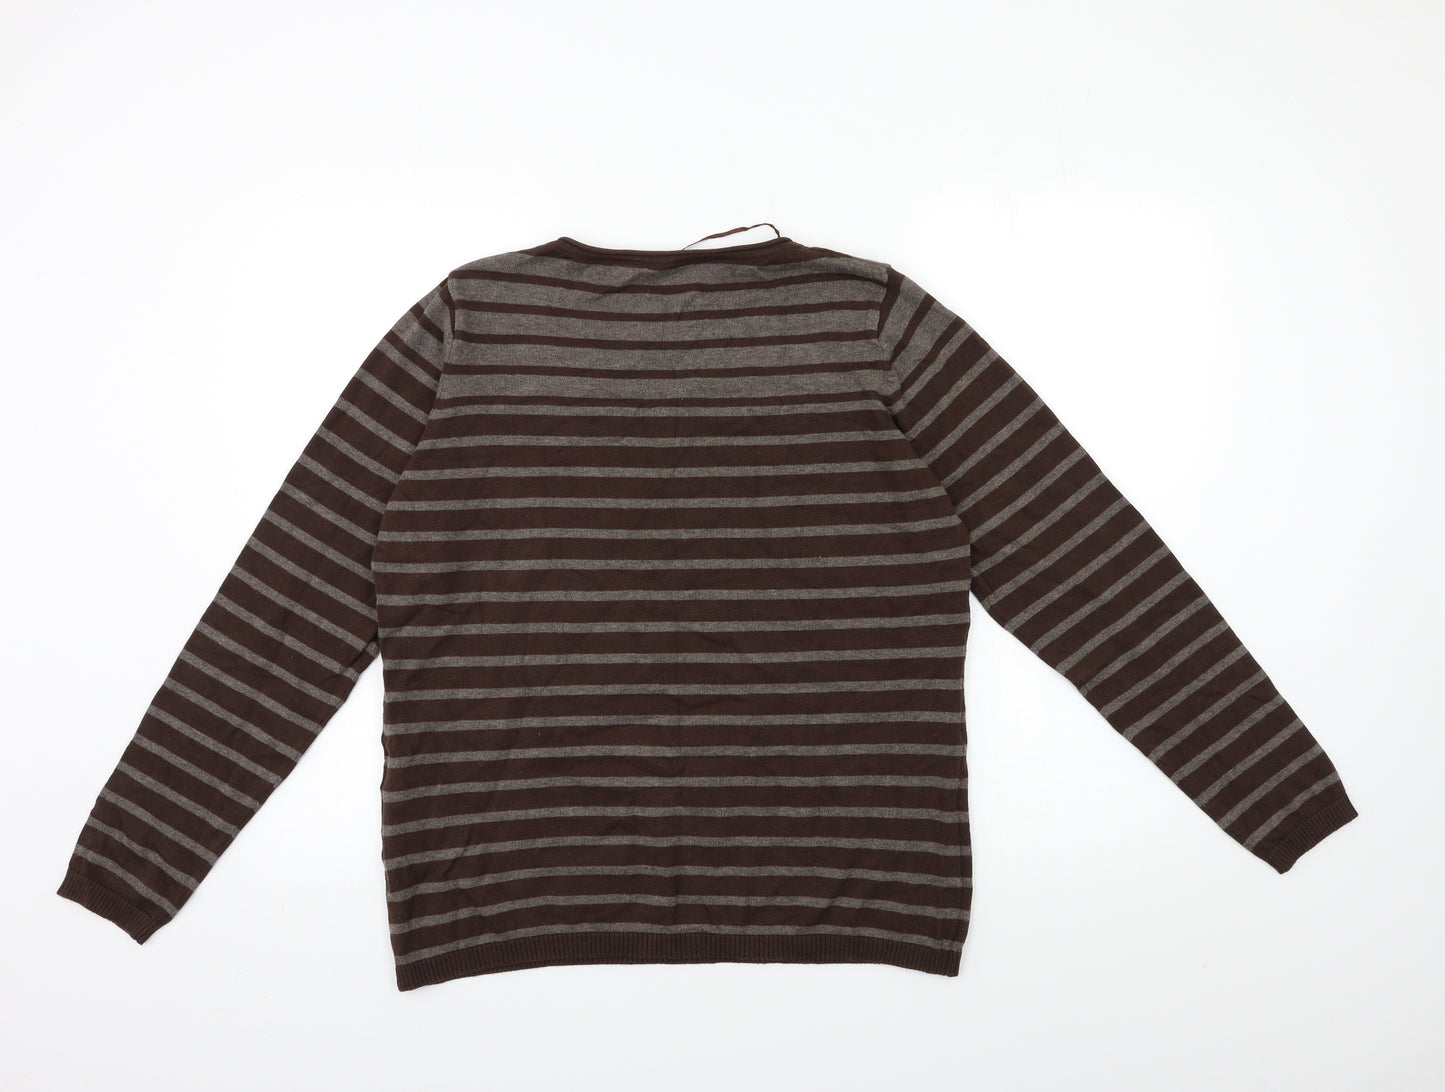 Stooker Womens Brown Striped  Pullover Jumper Size 14